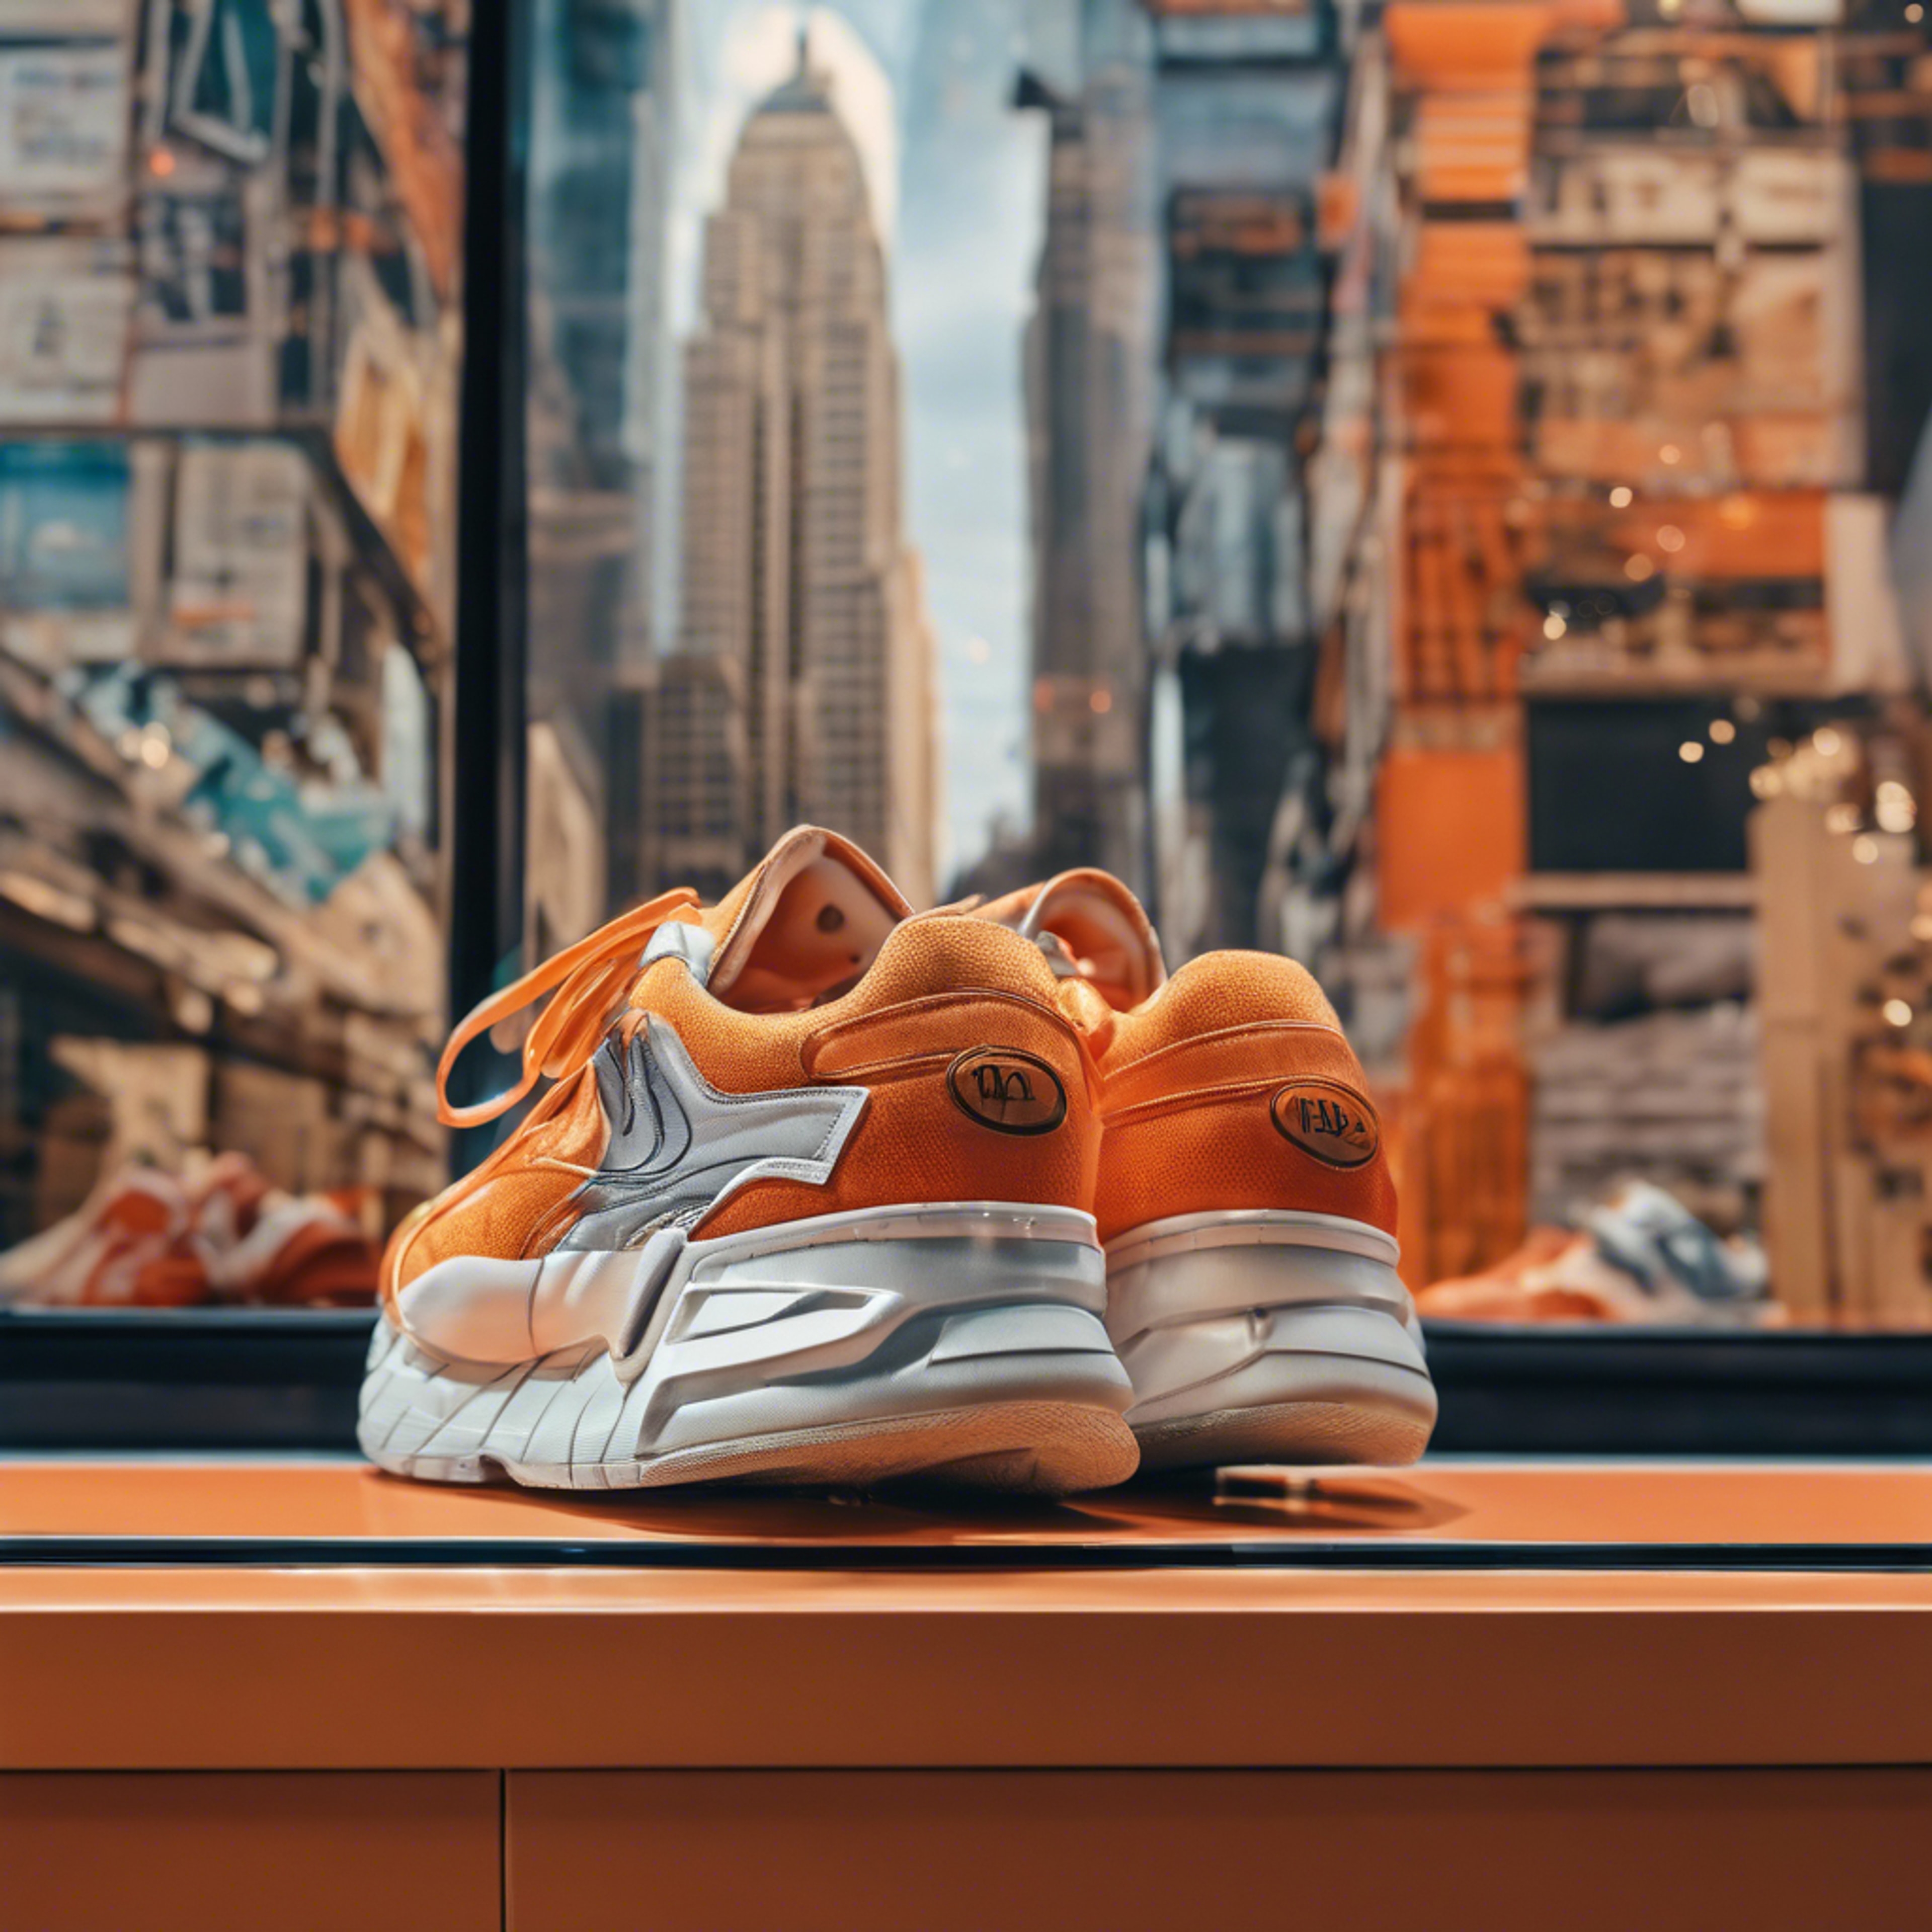 Orange Y2K-inspired sneakers displayed in a shoe store window with a retro cityscape backdrop. Wallpaper[c42ef01953ac4184b365]